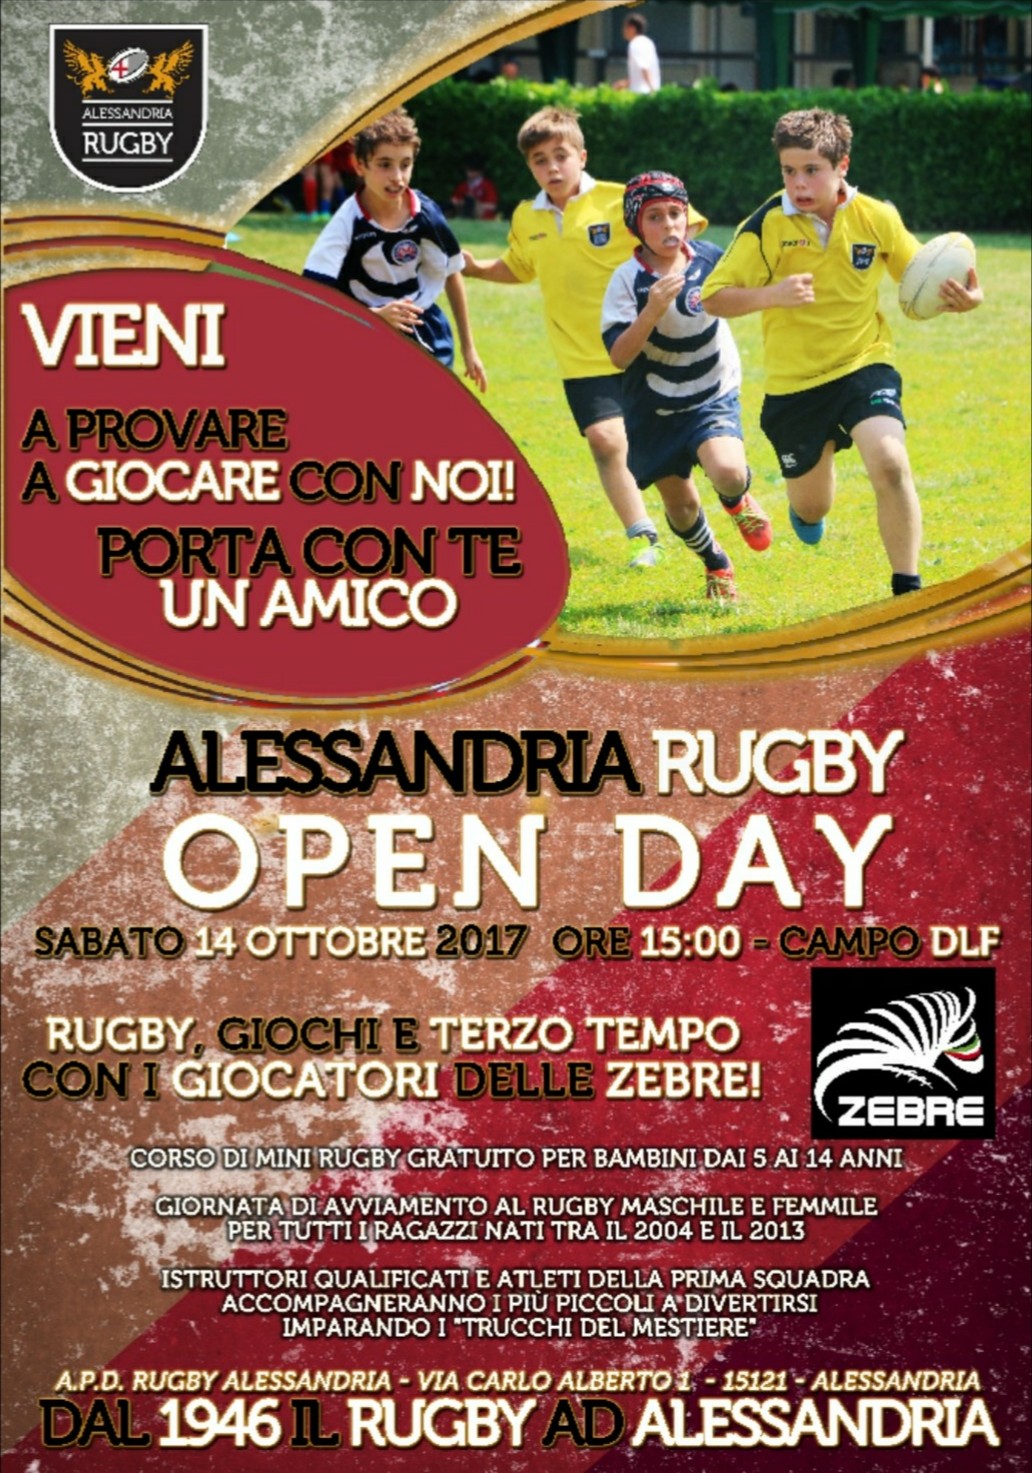 Alessandria Rugby: open day insieme alle Zebre